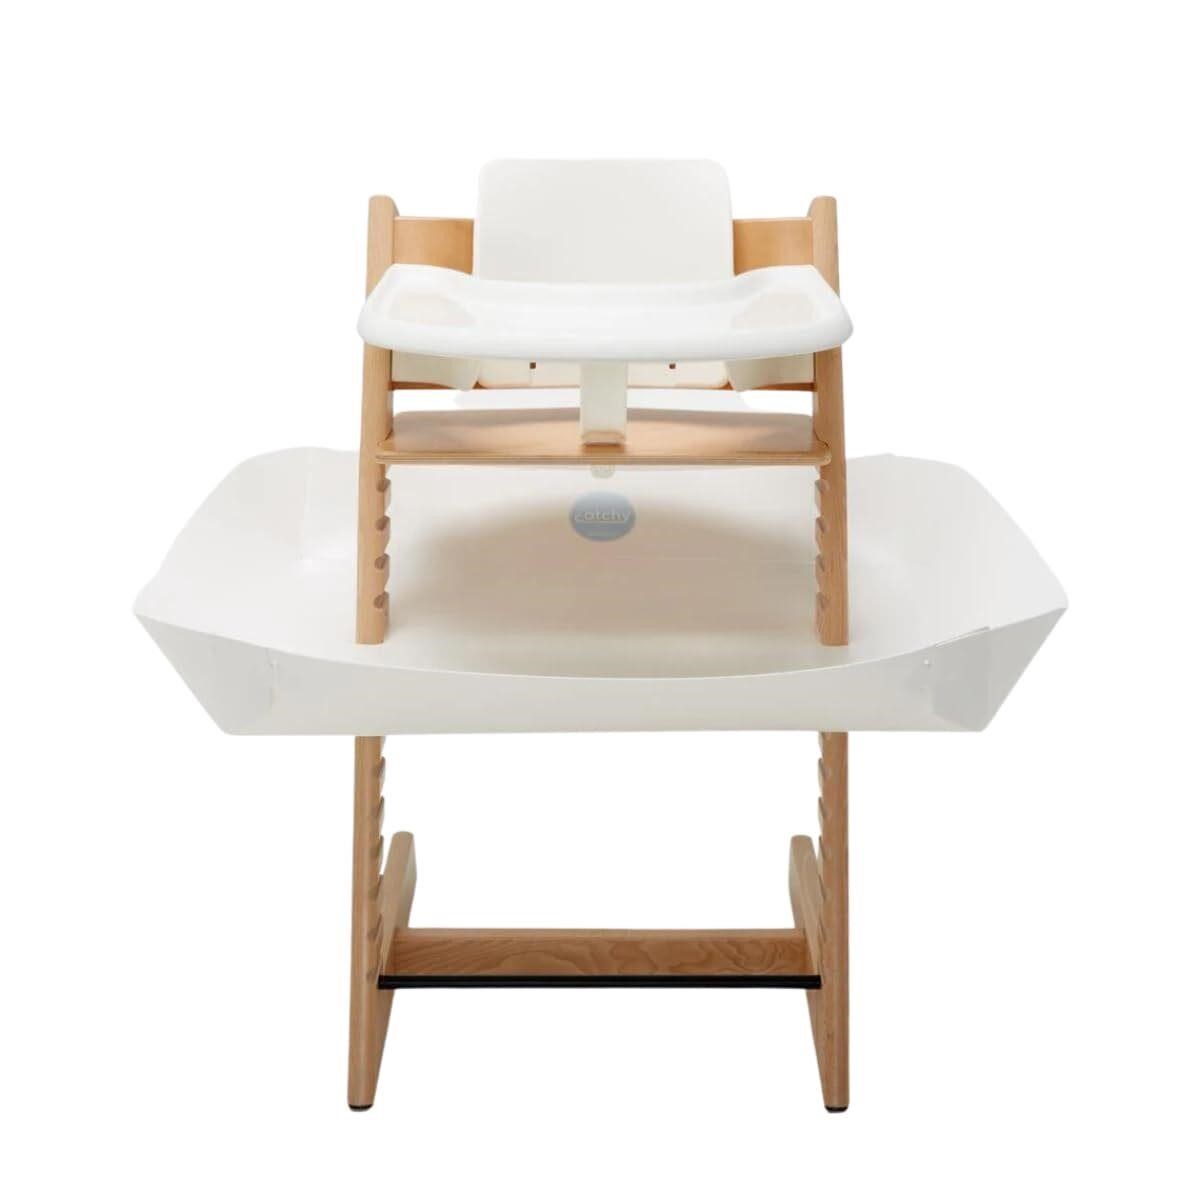 $60  Food Catcher for Stokke Tripp Trapp Highchair